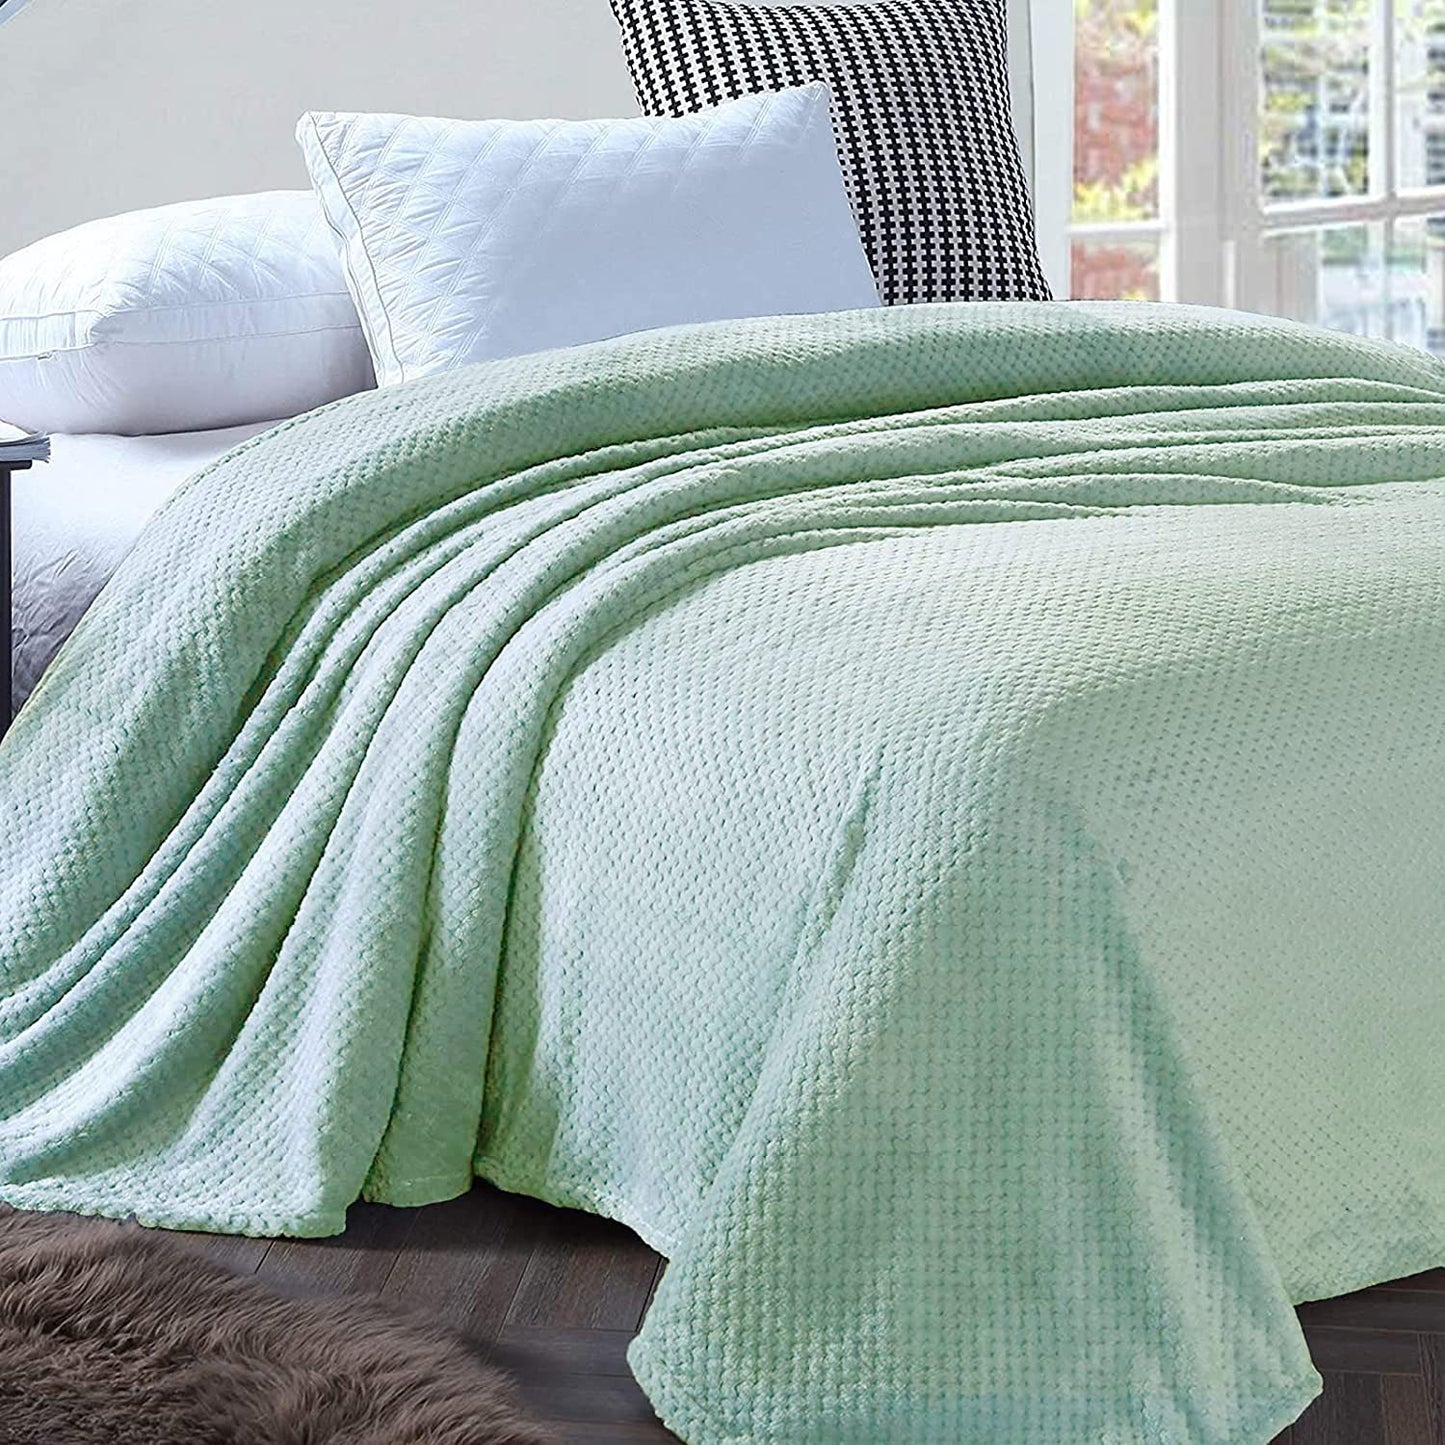 Exclusivo Mezcla Waffle Textured Soft Fleece Blanket, Twin Size Bed Blanket, Cozy Warm and Lightweight (Mint Green, 90x66 inches)